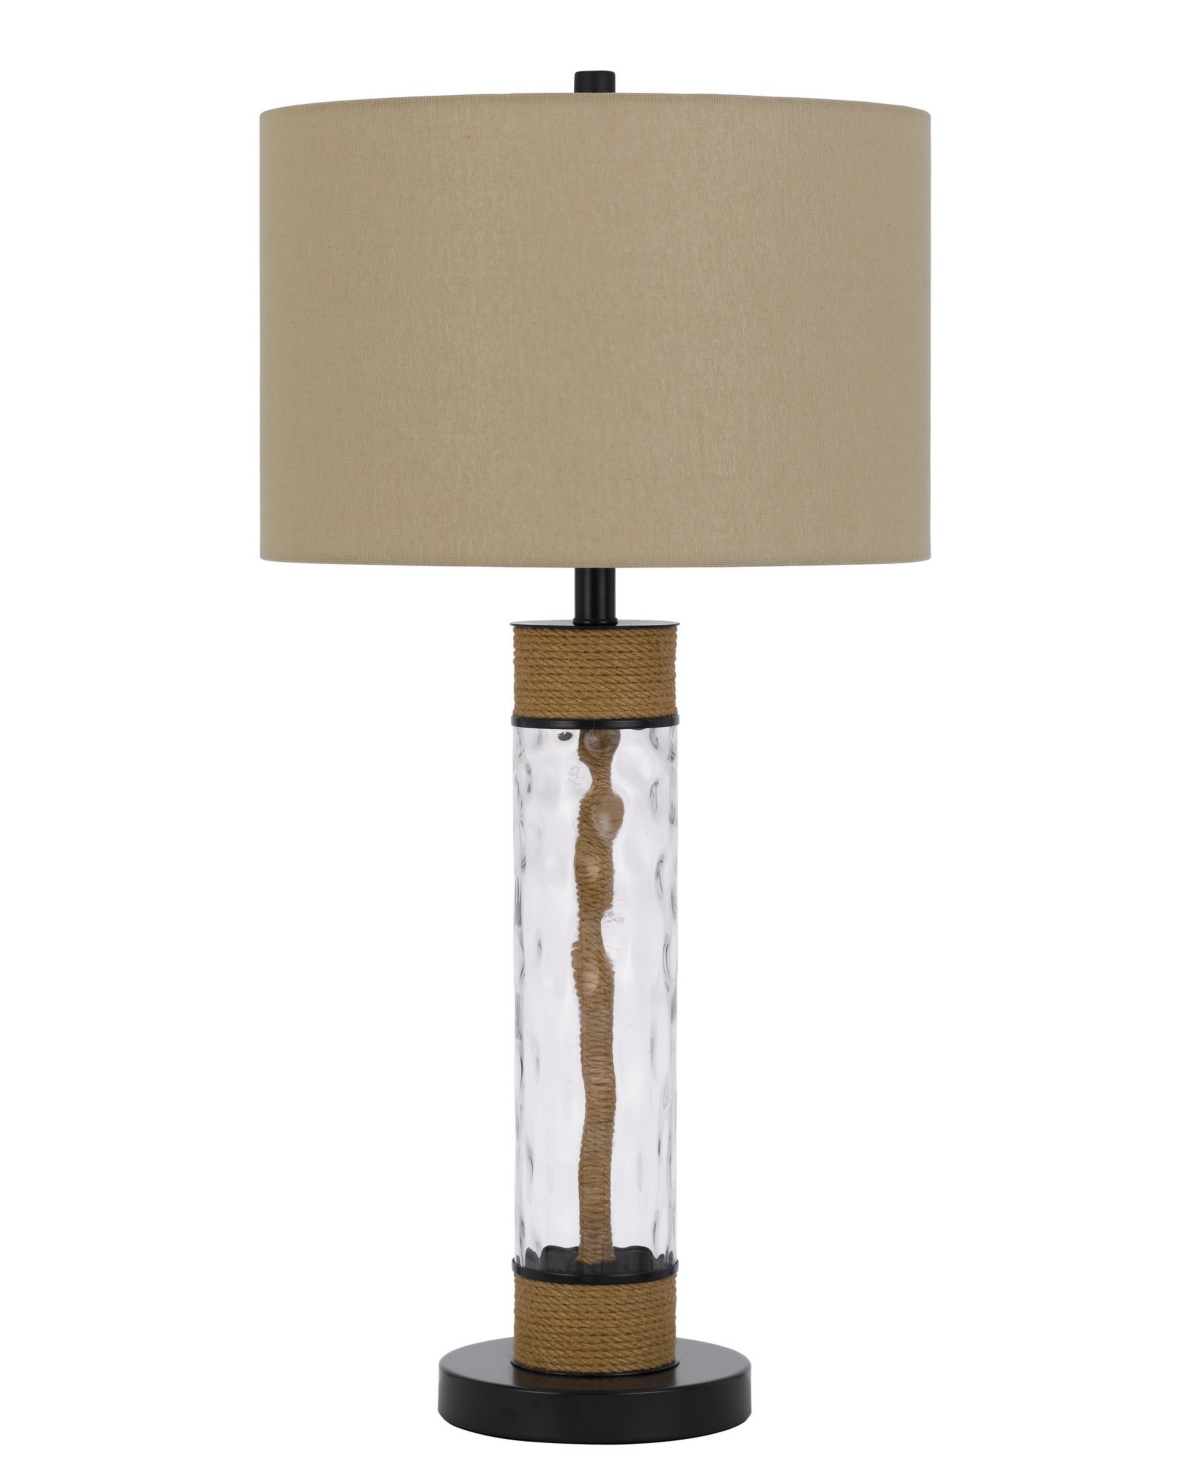 Cal Lighting Bartow 32" Height Metal And Glass Table Lamp In Black,burlap,textured Glass